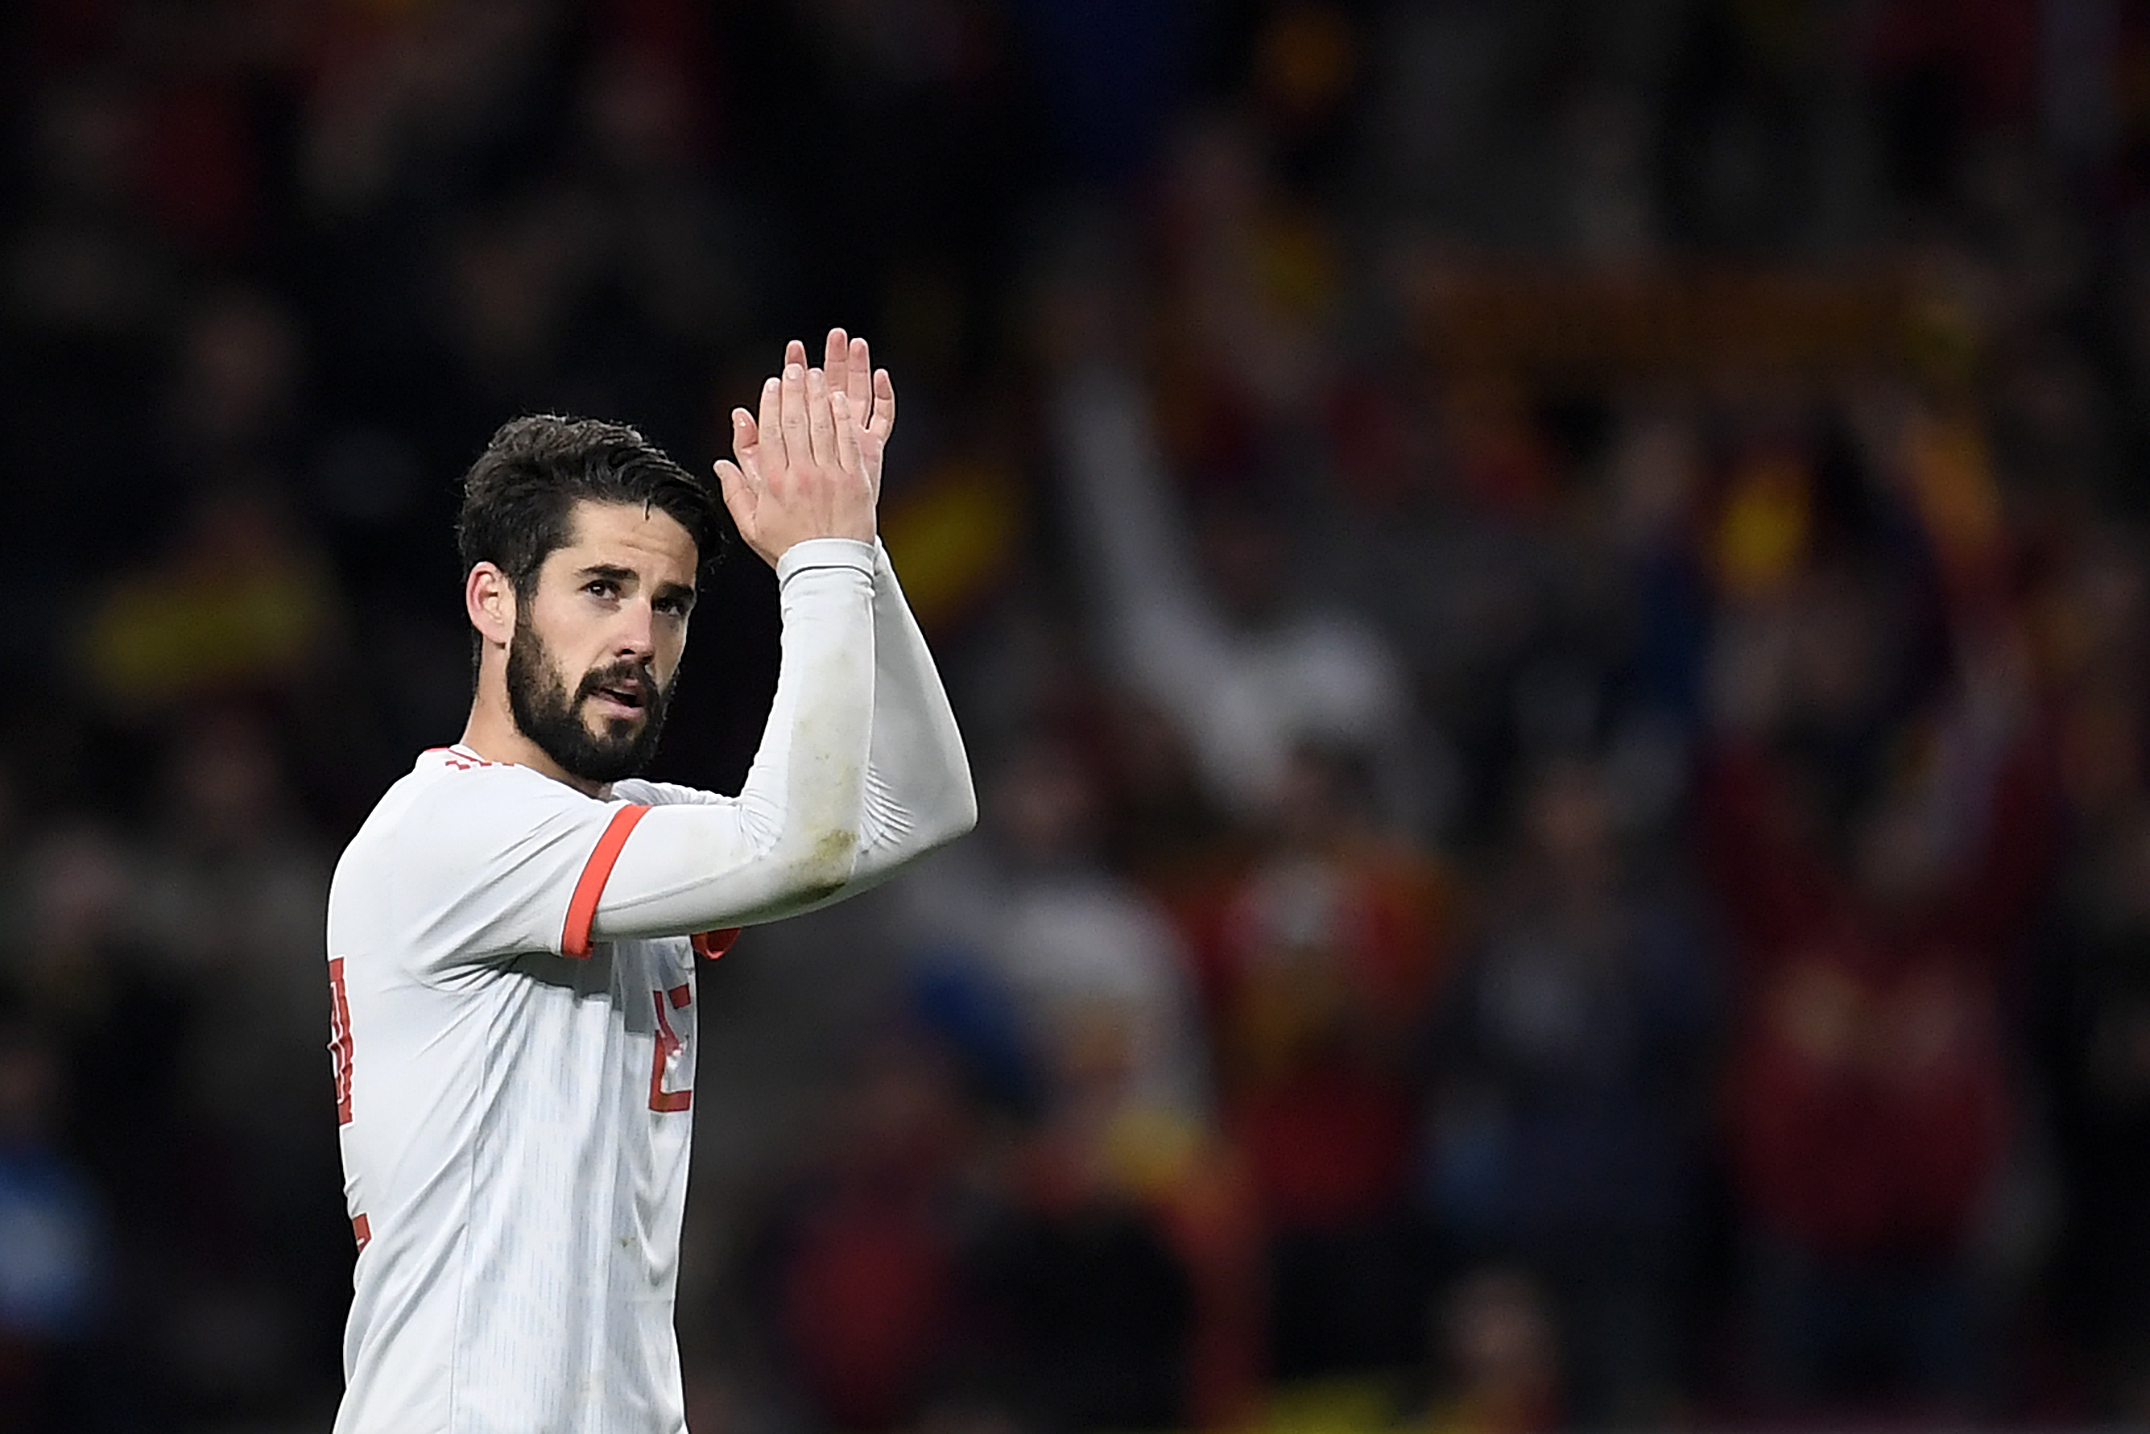 Spain's midfielder Isco celebrates after scoring a goal during a friendly football match between Spain and Argentina at the Wanda Metropolitano Stadium in Madrid on March 27, 2018. / AFP PHOTO / GABRIEL BOUYS        (Photo credit should read GABRIEL BOUYS/AFP/Getty Images)